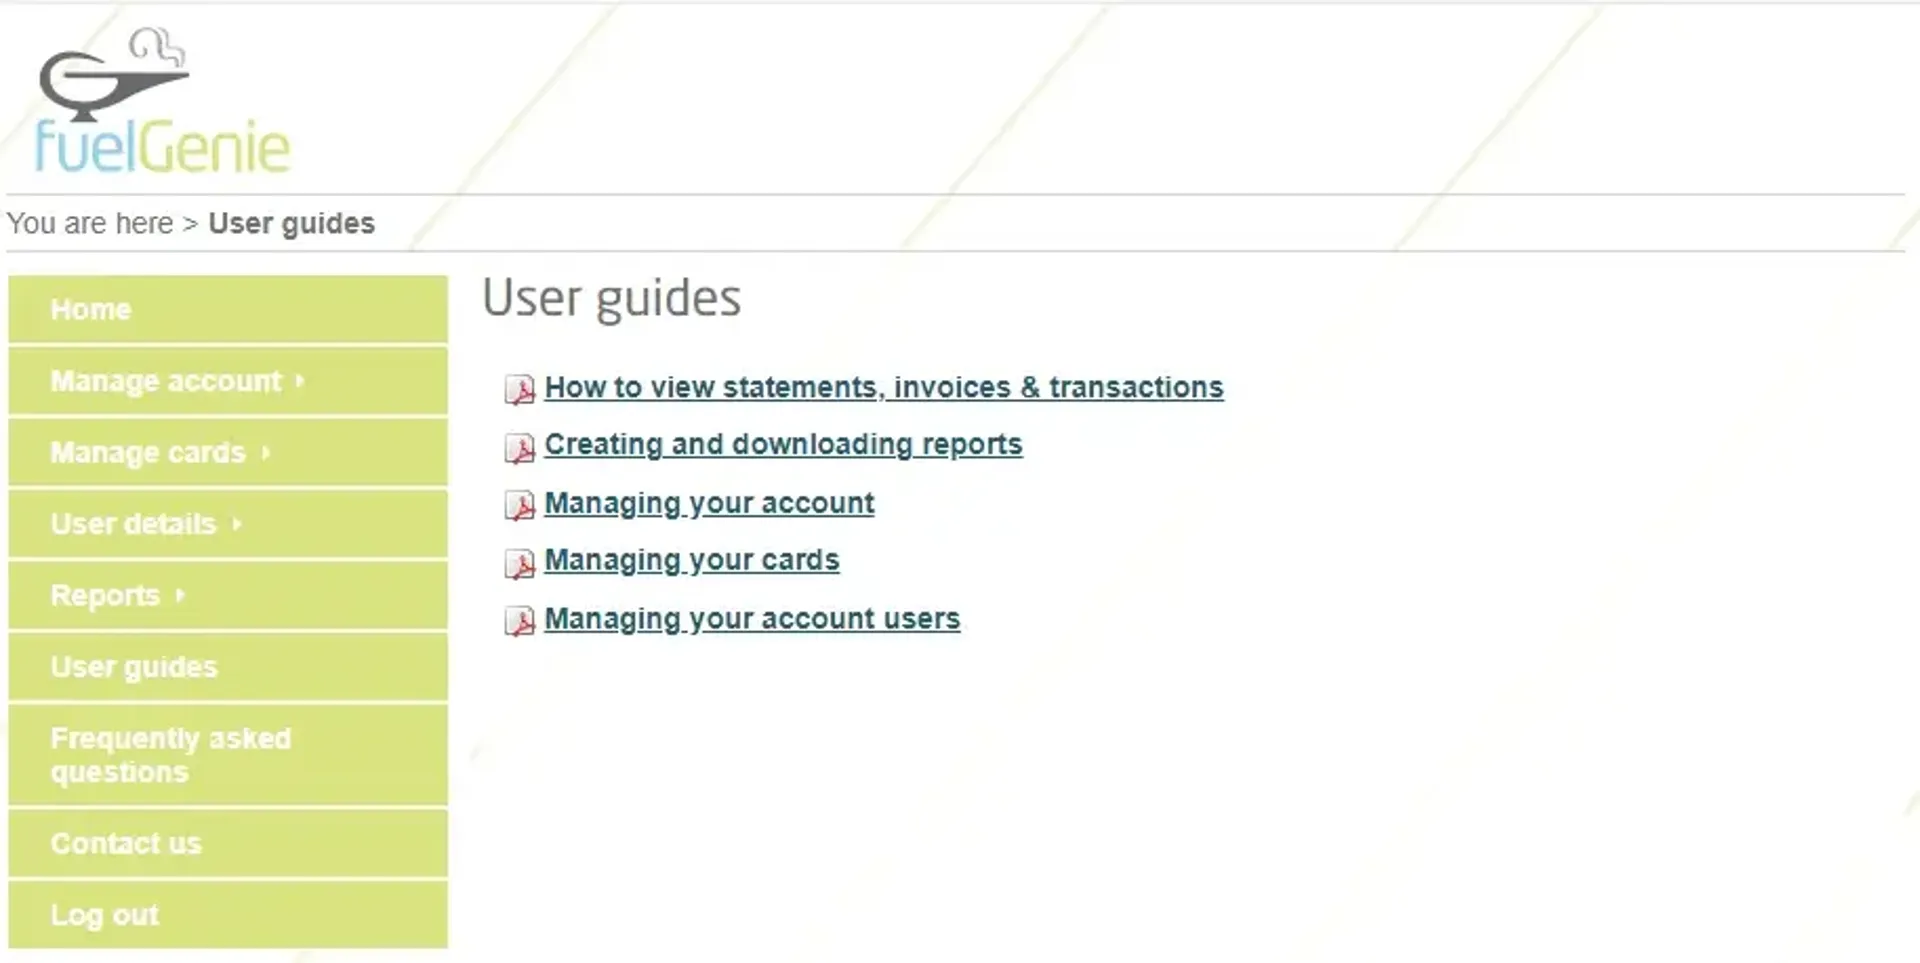 Dashboard view with list of user guides